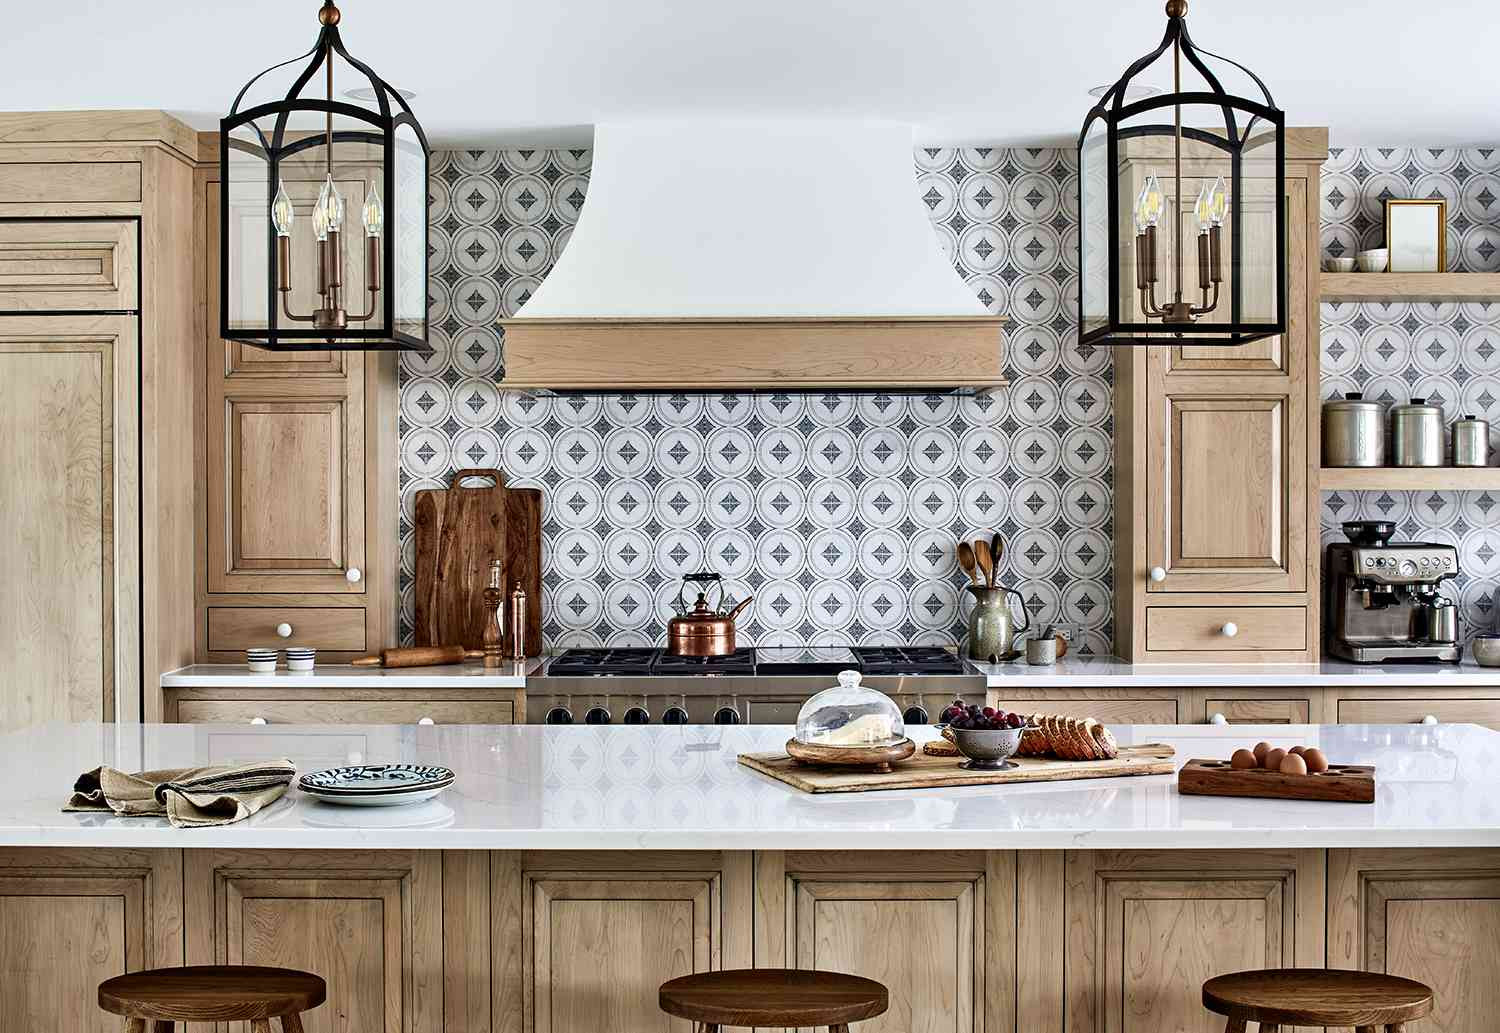 Rustic Kitchen Ideas That Are Full of Charm